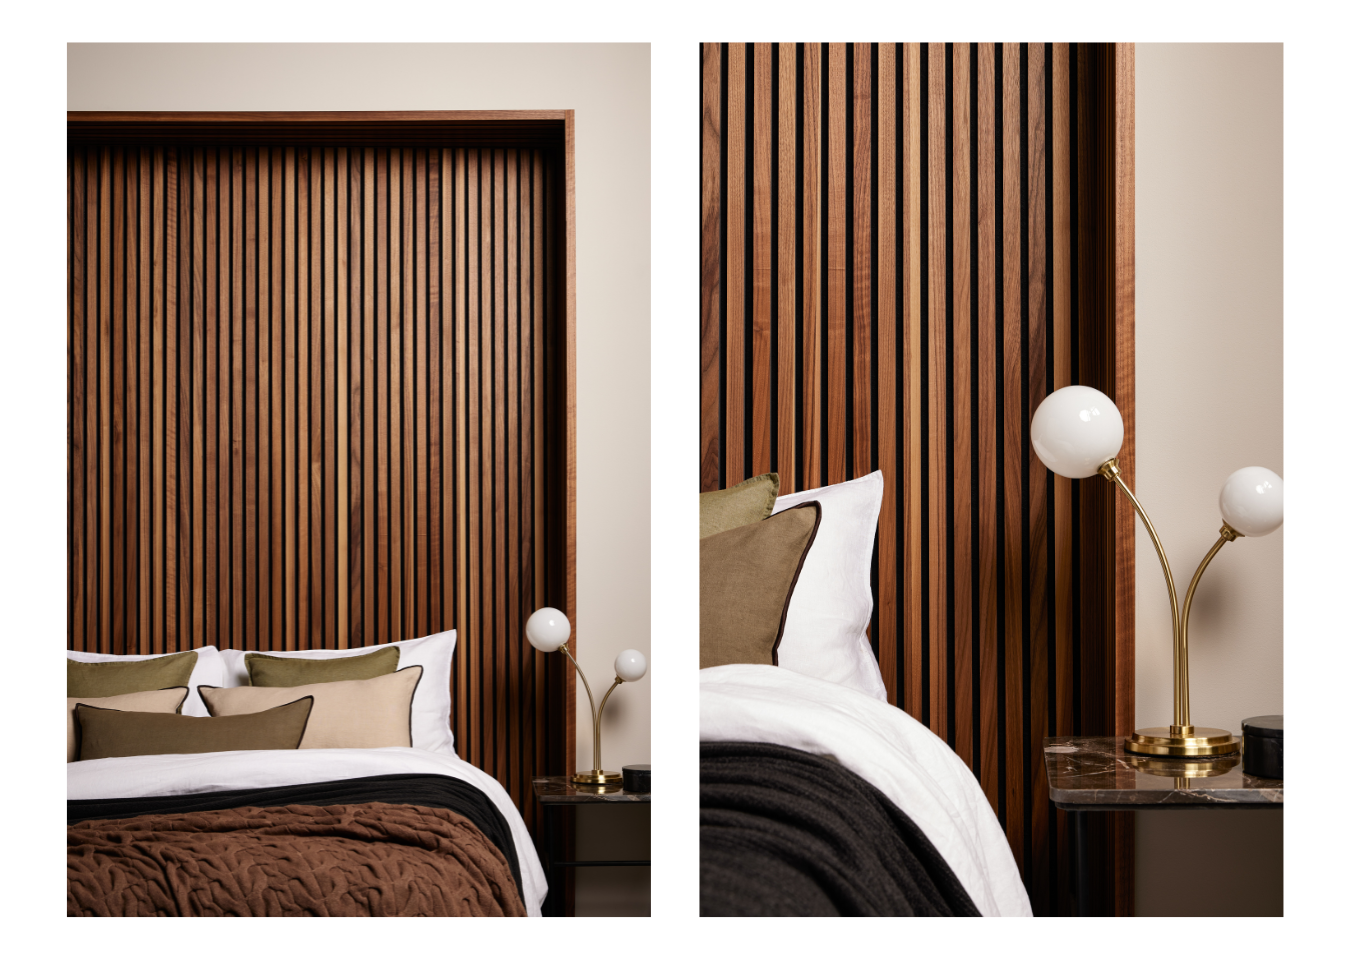 Two images showing a bed with a deep walnut wooden slats as a headboard, with white and brown bedding and a side table with a lamp